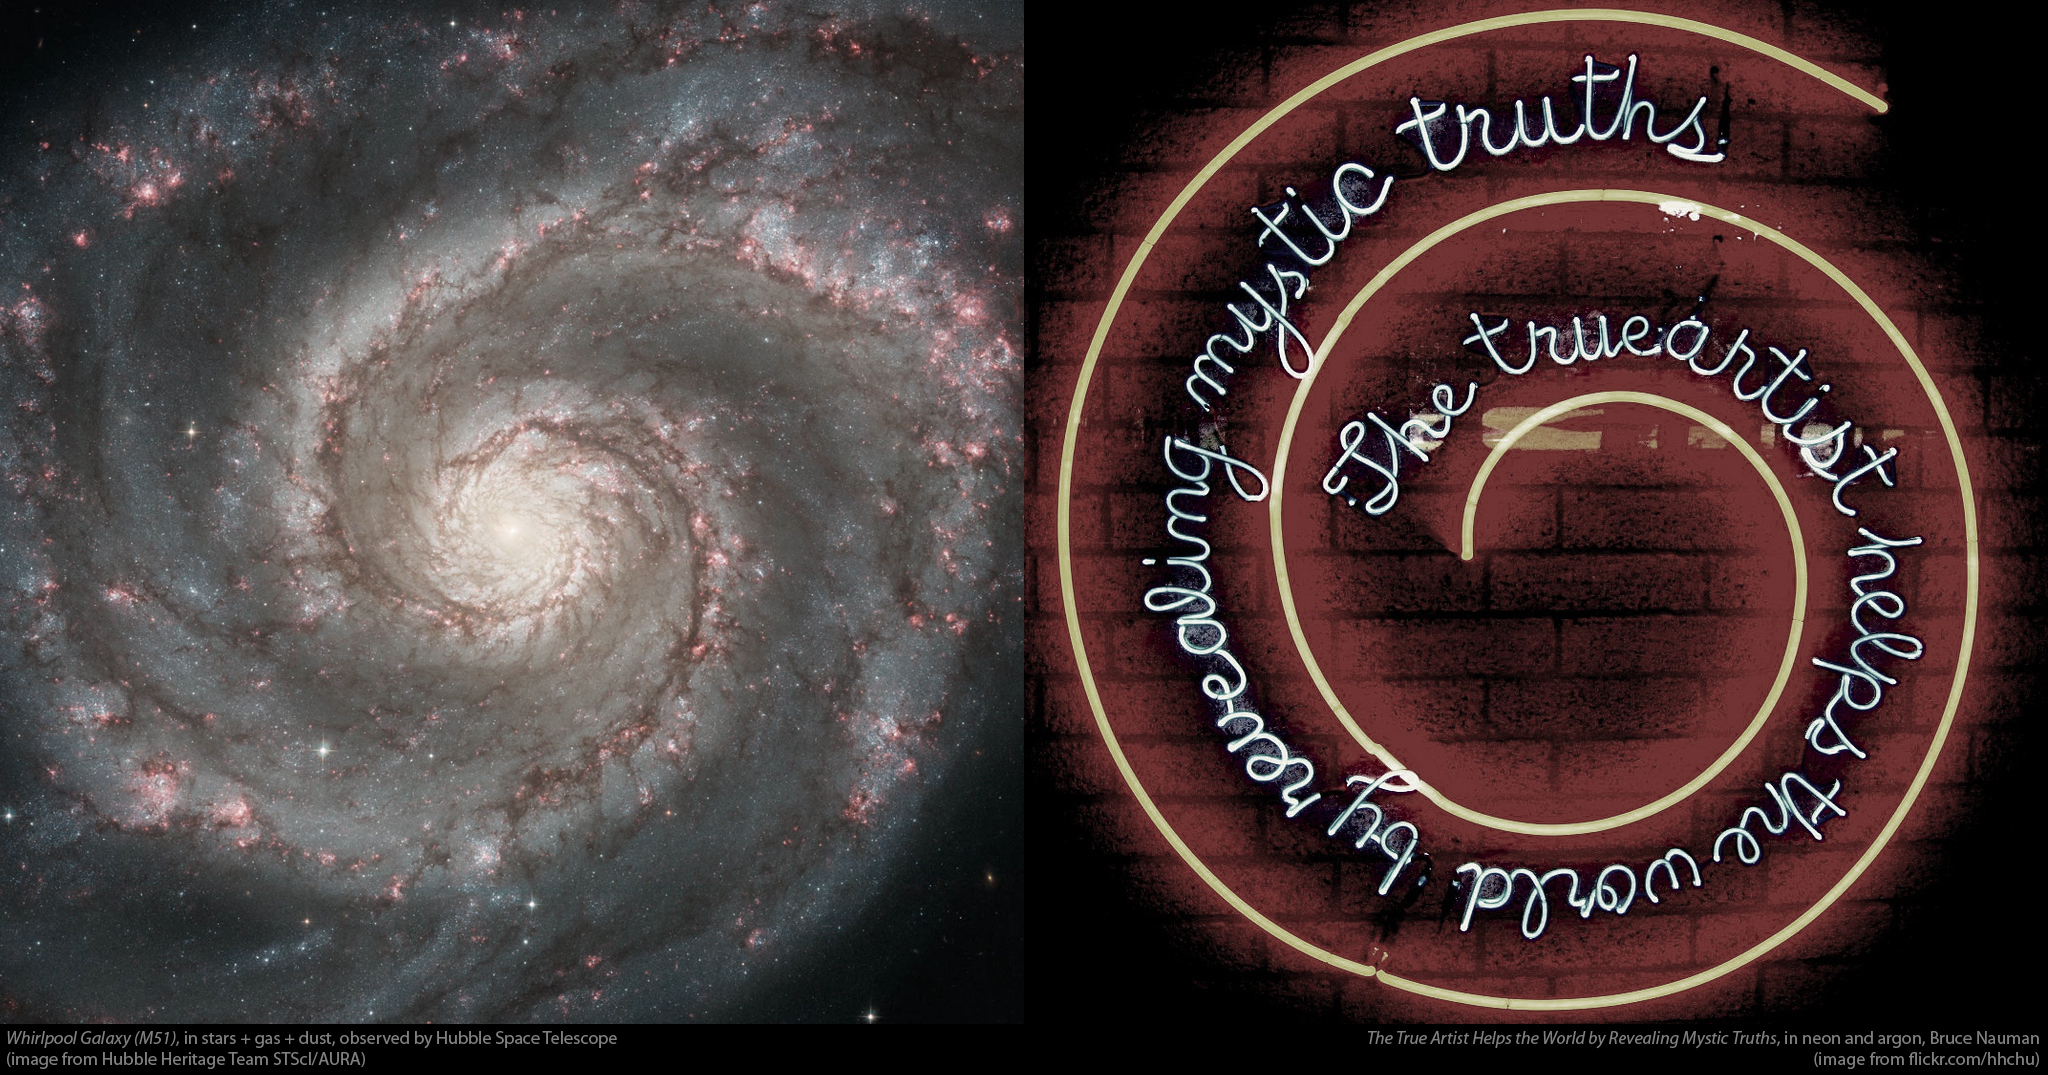 Two images side by side. Left, an image of the Whirlpool Galaxy (M51) where light is produced by glowing gas, stars, and dust. Right, an image of a sculpture by Bruce Nauman that says 'The true artist helps the world by revealing mystic truths.' in a spiral shape and where light is produced by excited neon and argon gas inside glass tubes.